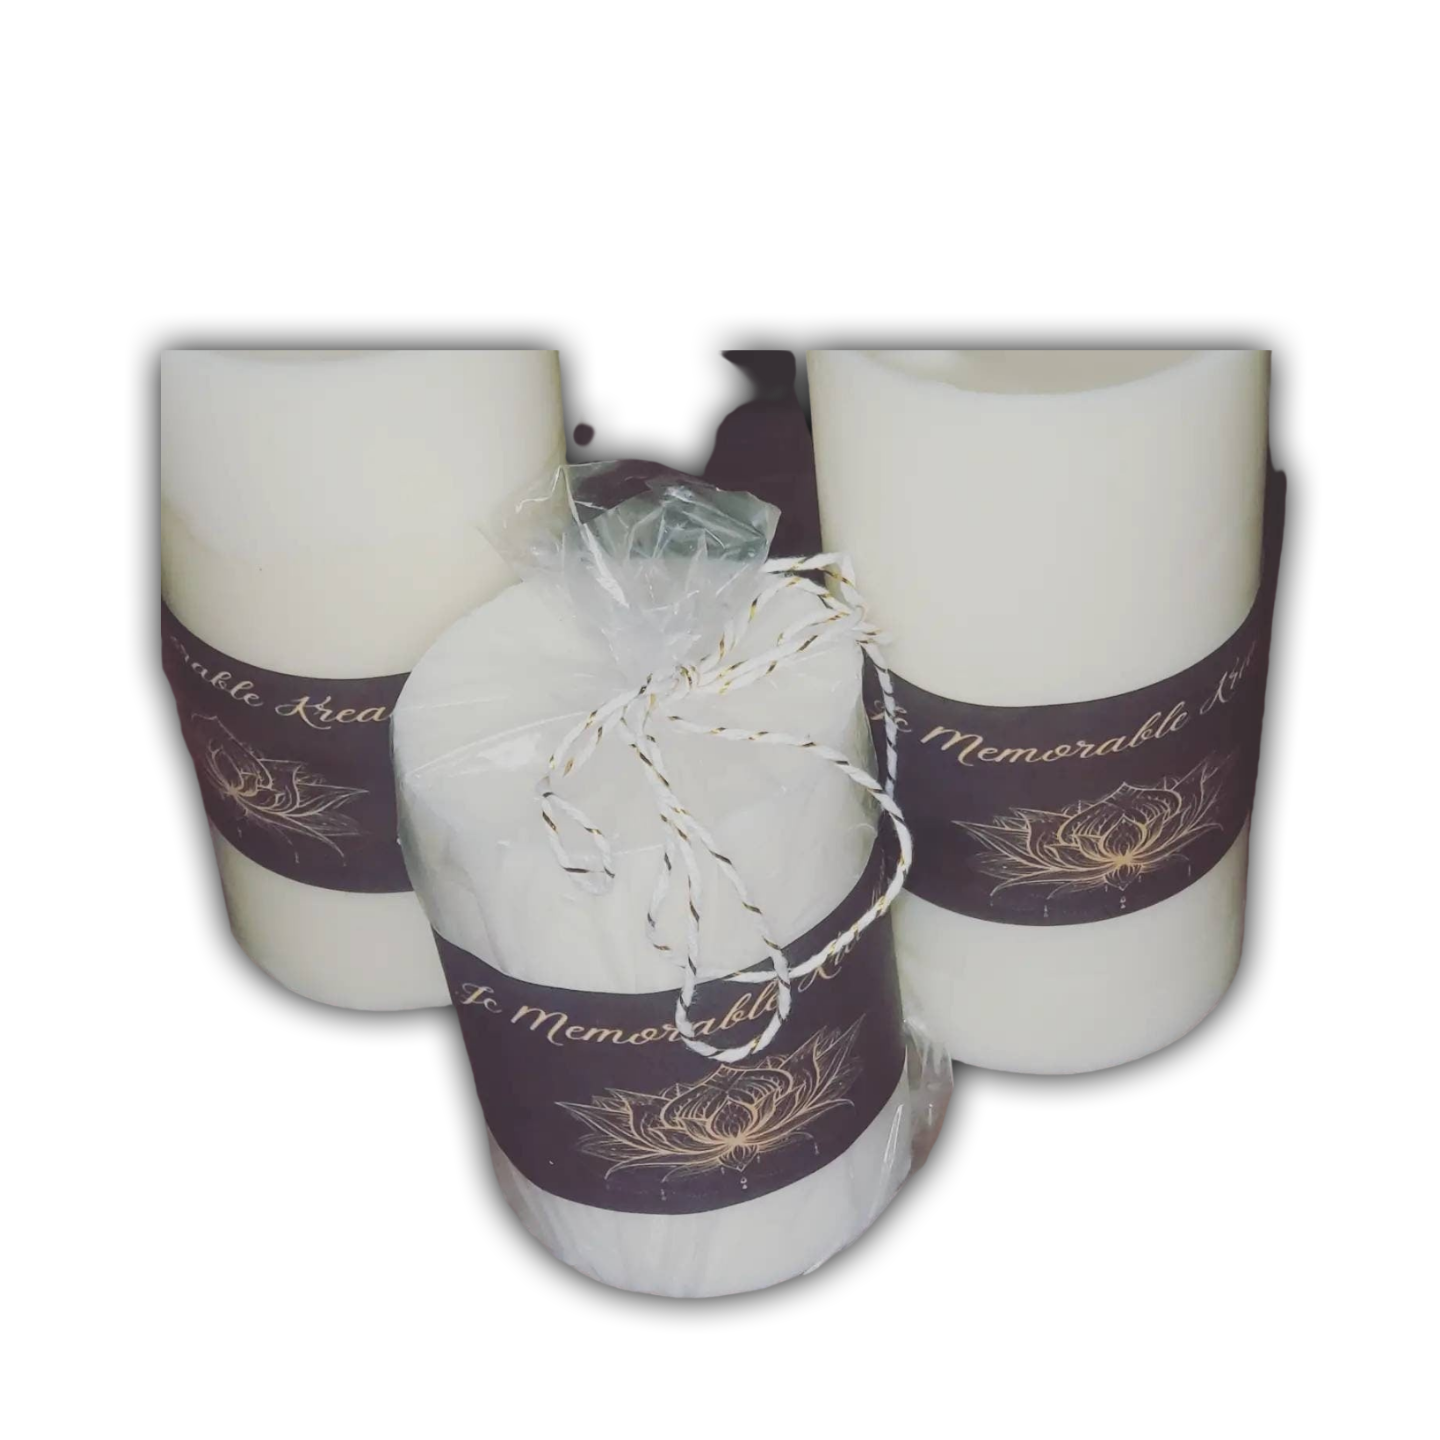 Pillar Candles| Home Decor Gift | Coconut Wax Candle | Scented Candle| Container Candle| Various Scents